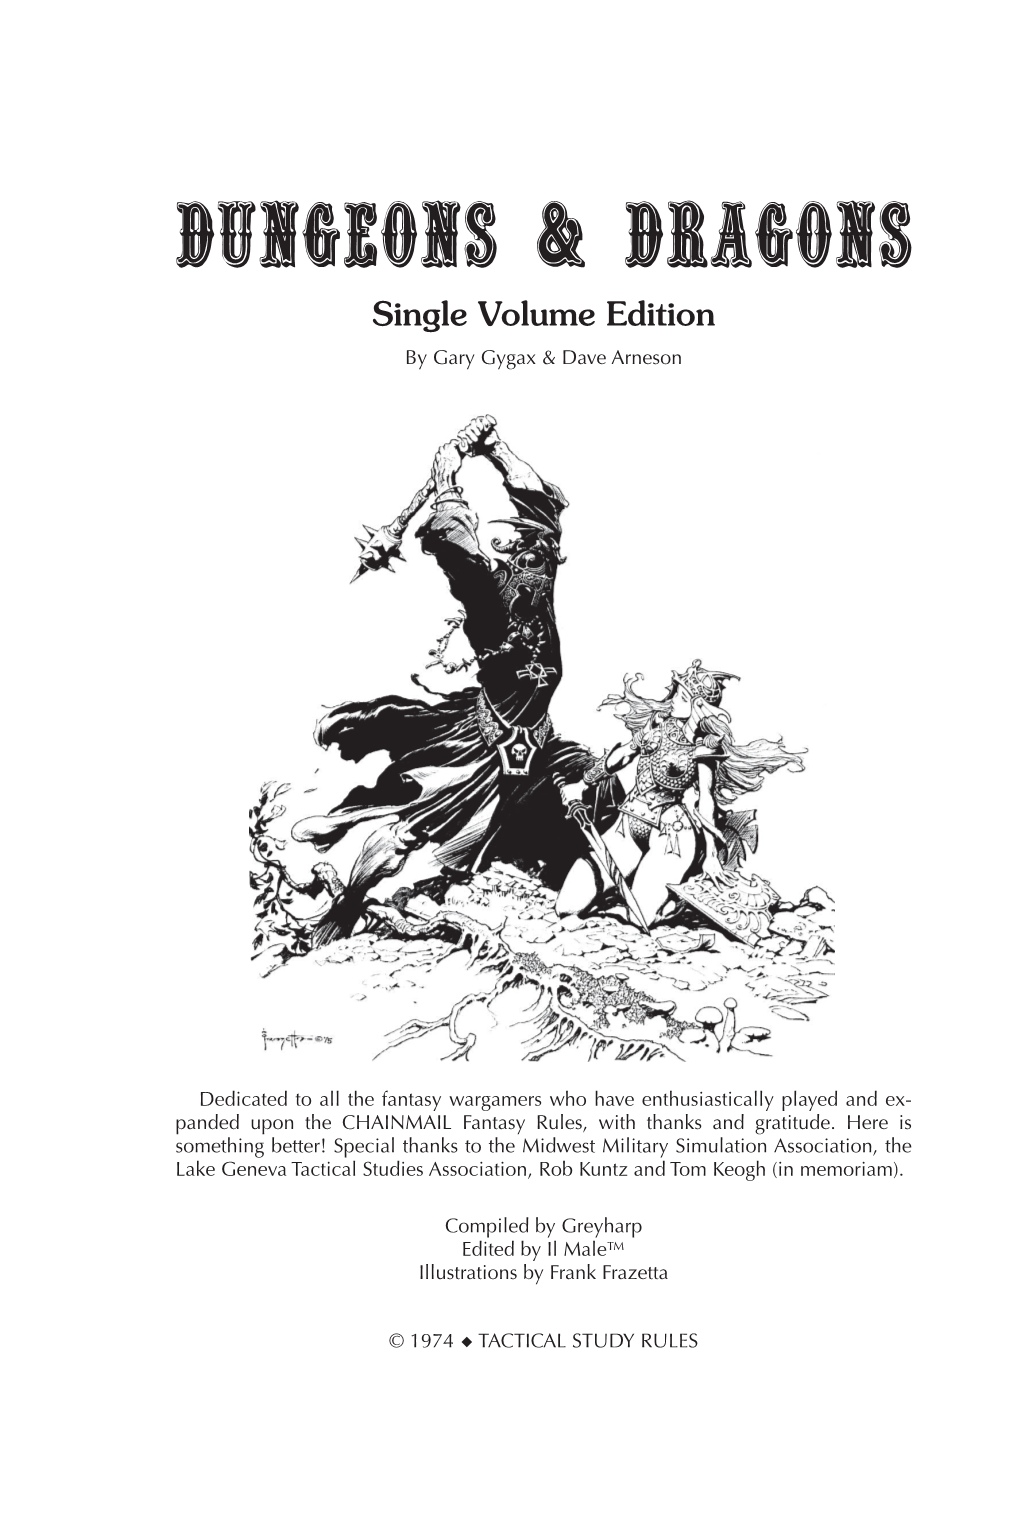 Dungeons & Dragons Single Volume Edition